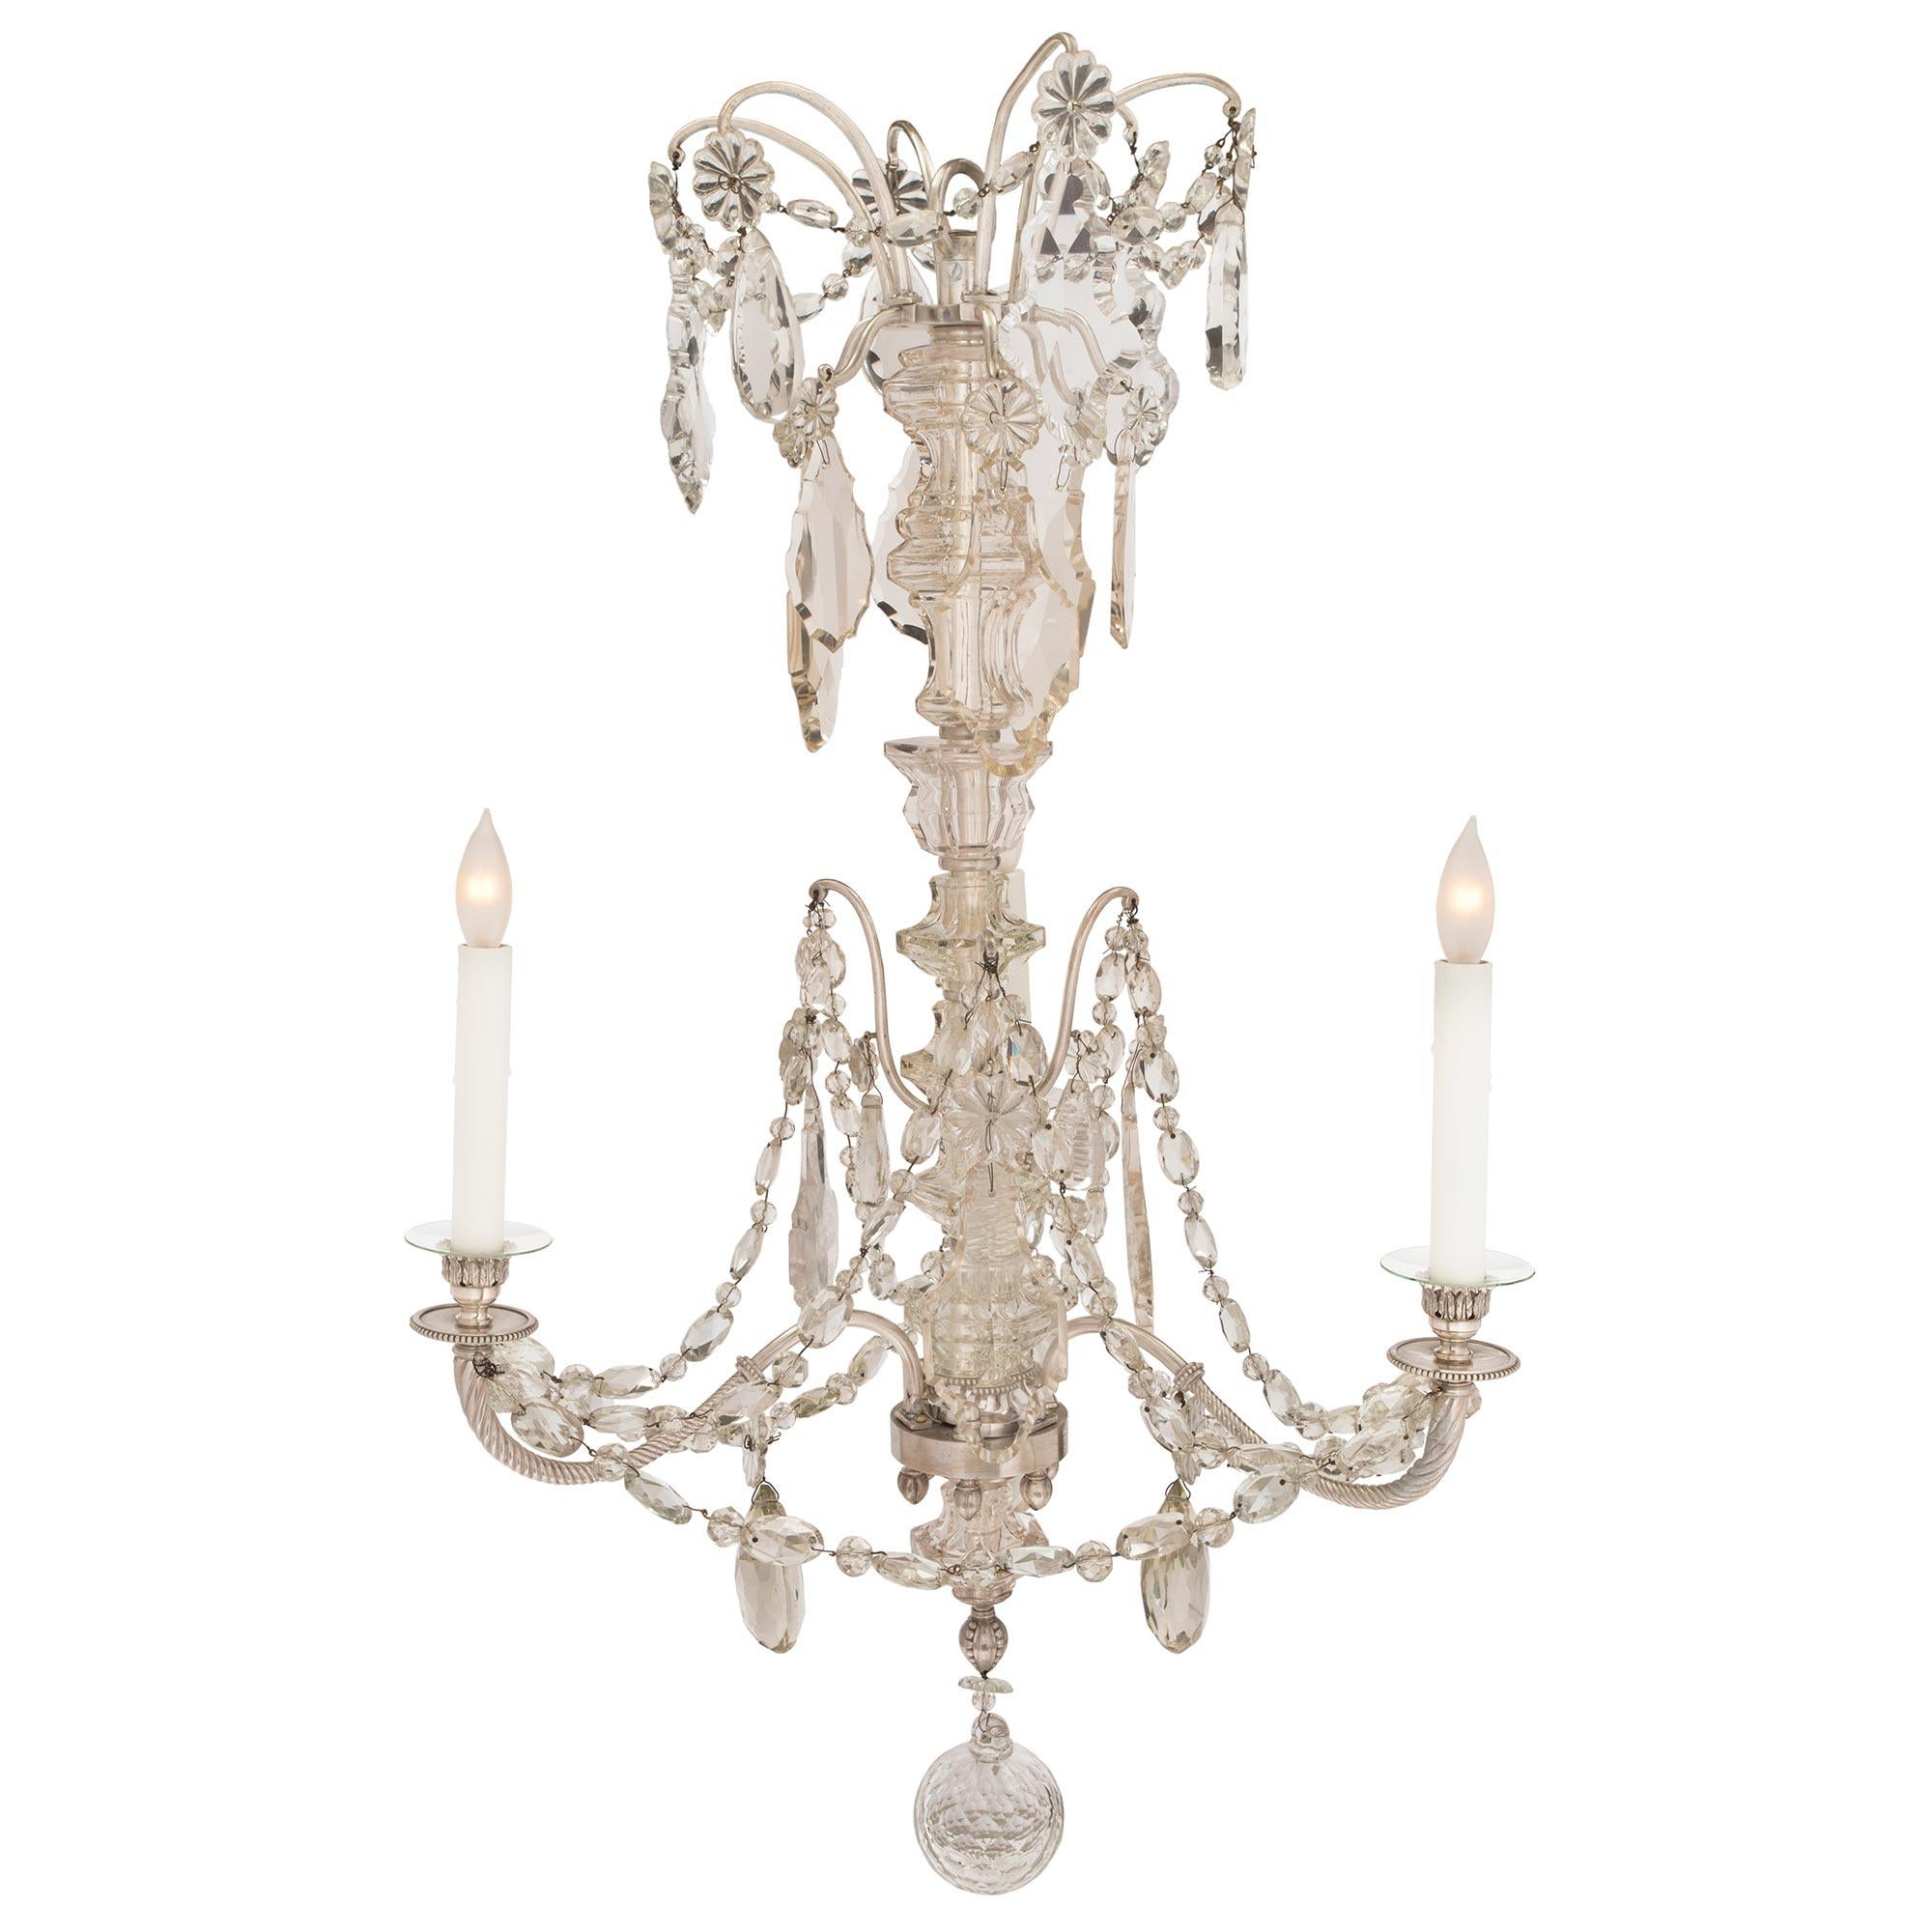 Silvered French Mid-19th Century Louis XVI Style Baccarat Crystal and Bronze Chandelier For Sale